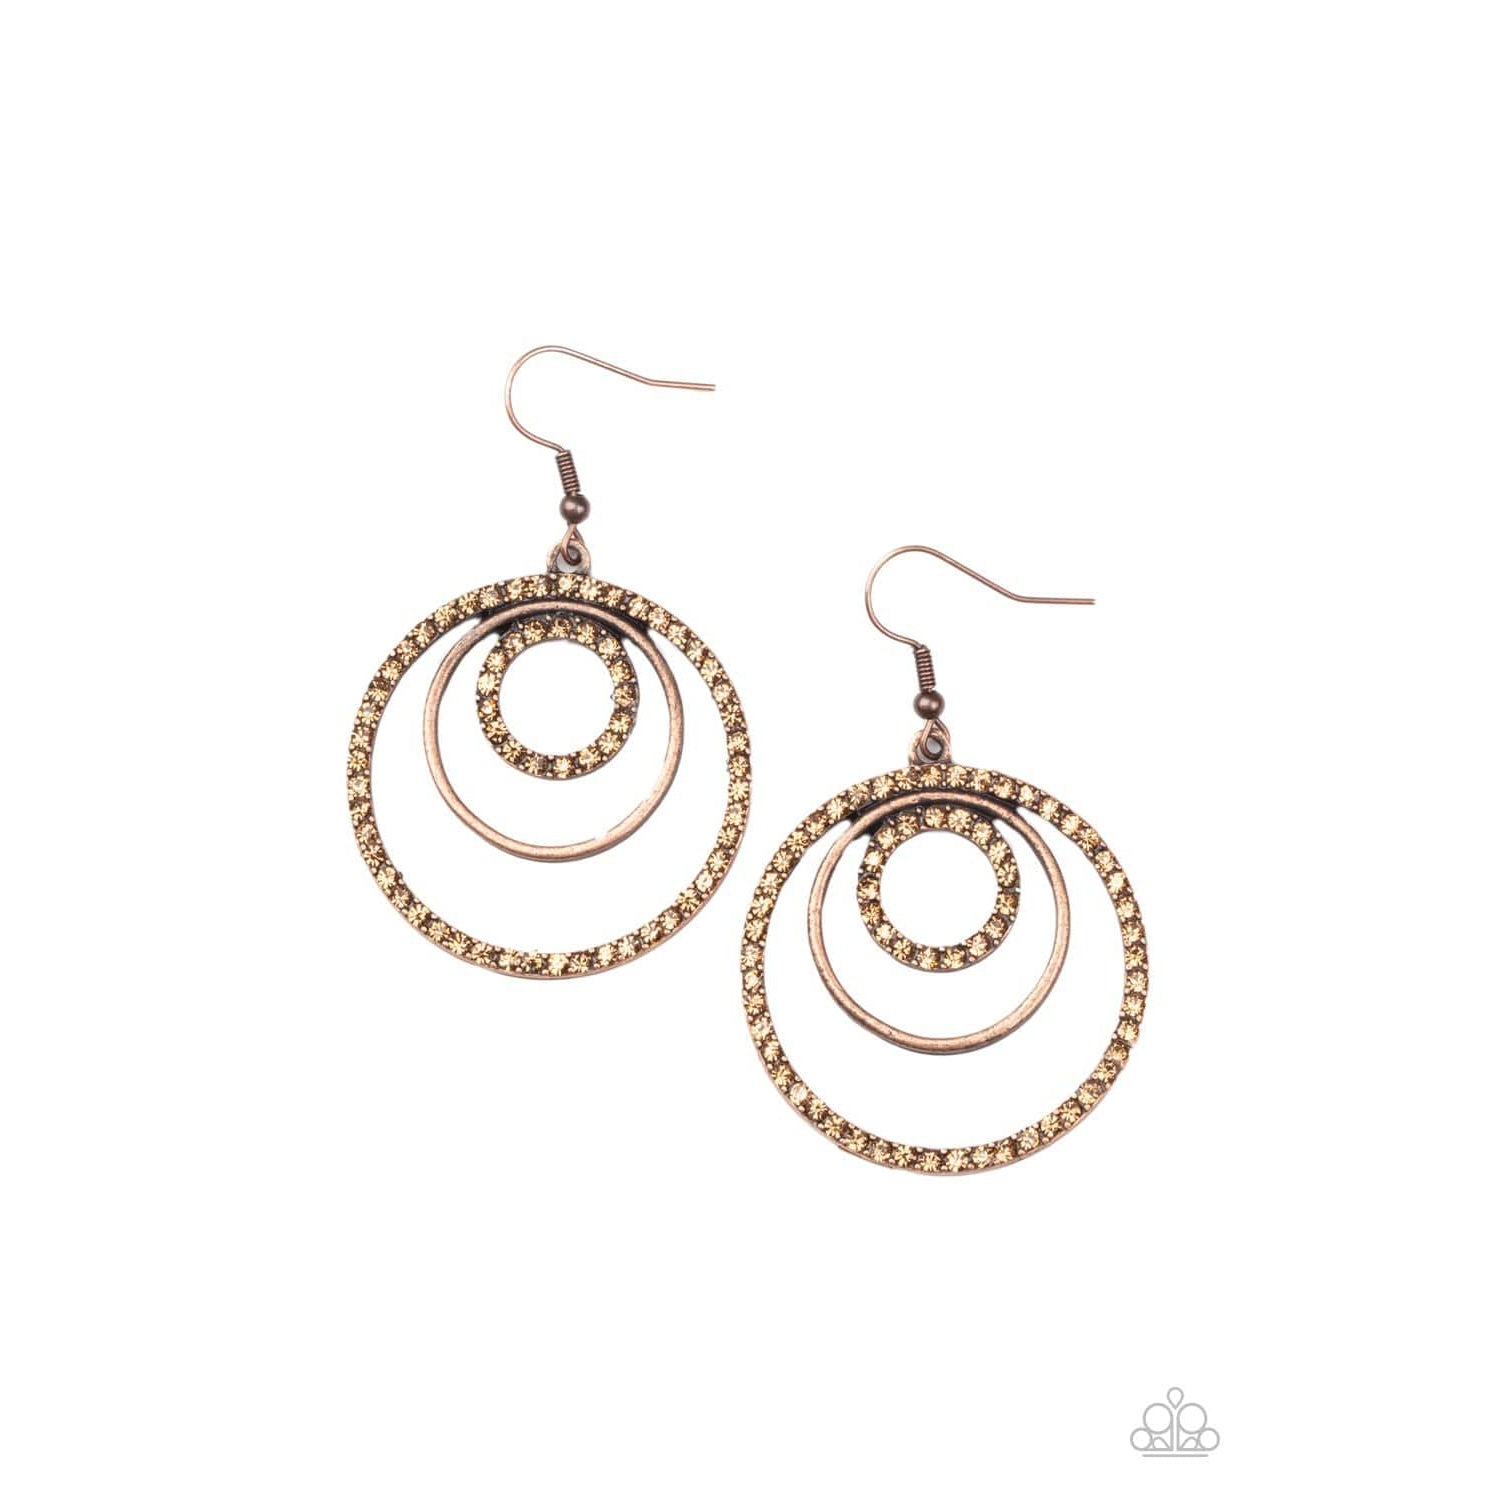 Bodaciously Bubbly - Copper Earrings - Paparazzi Accessories - GlaMarous Titi Jewels